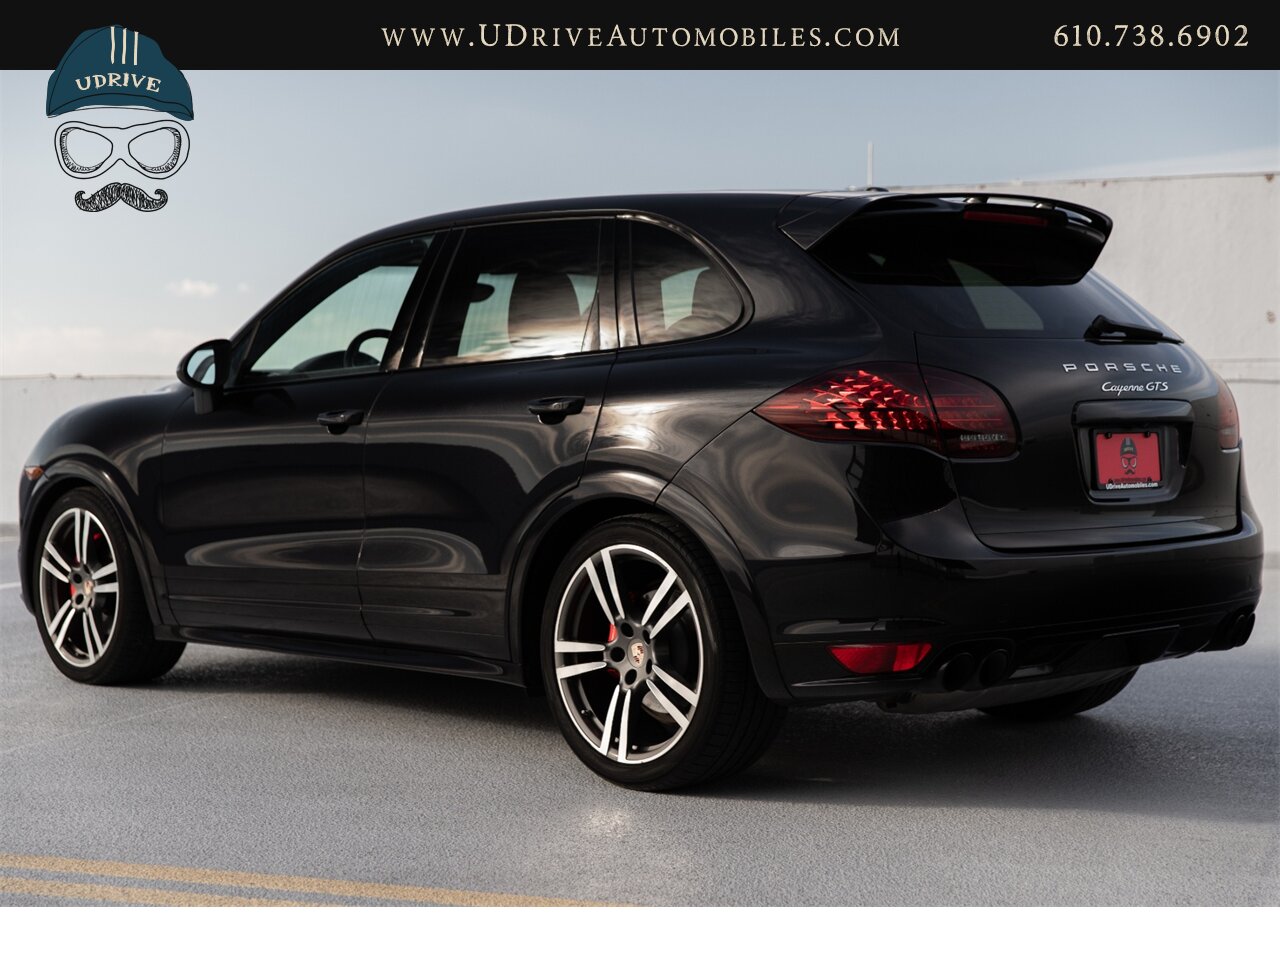 2013 Porsche Cayenne GTS Service History 1 Owner 21in Wheels  Espresso / Cognac Two Tone Leather - Photo 5 - West Chester, PA 19382